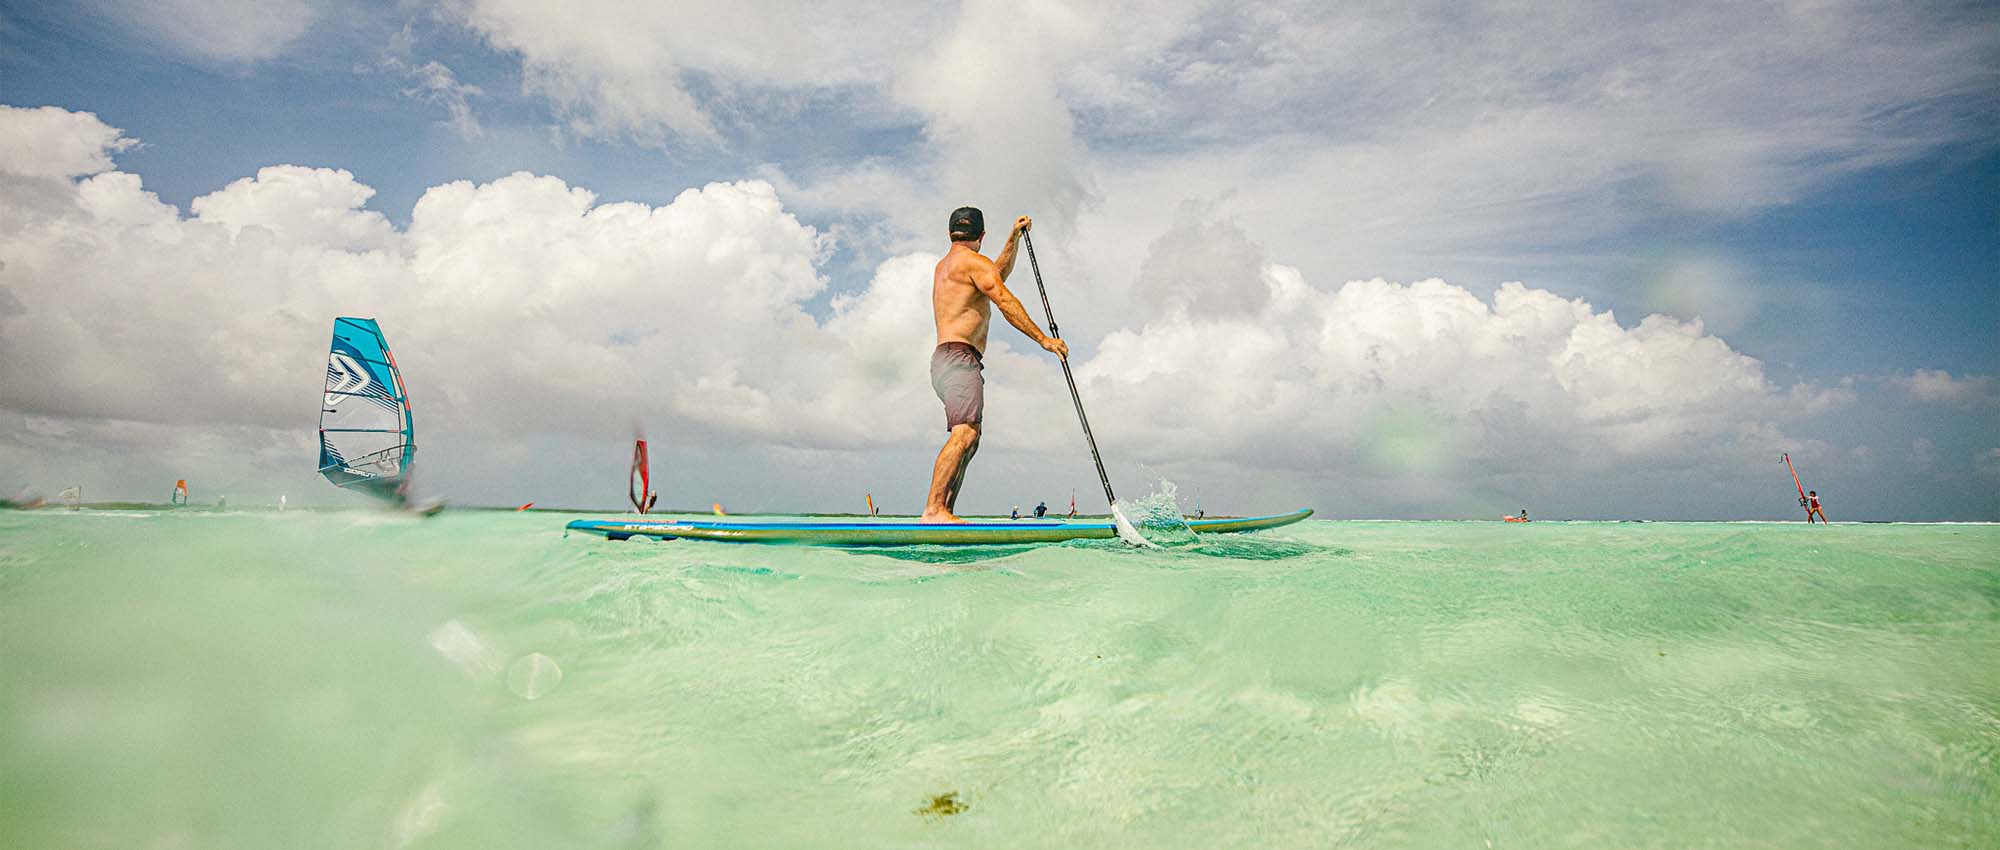 Man standing on paddleboard in water